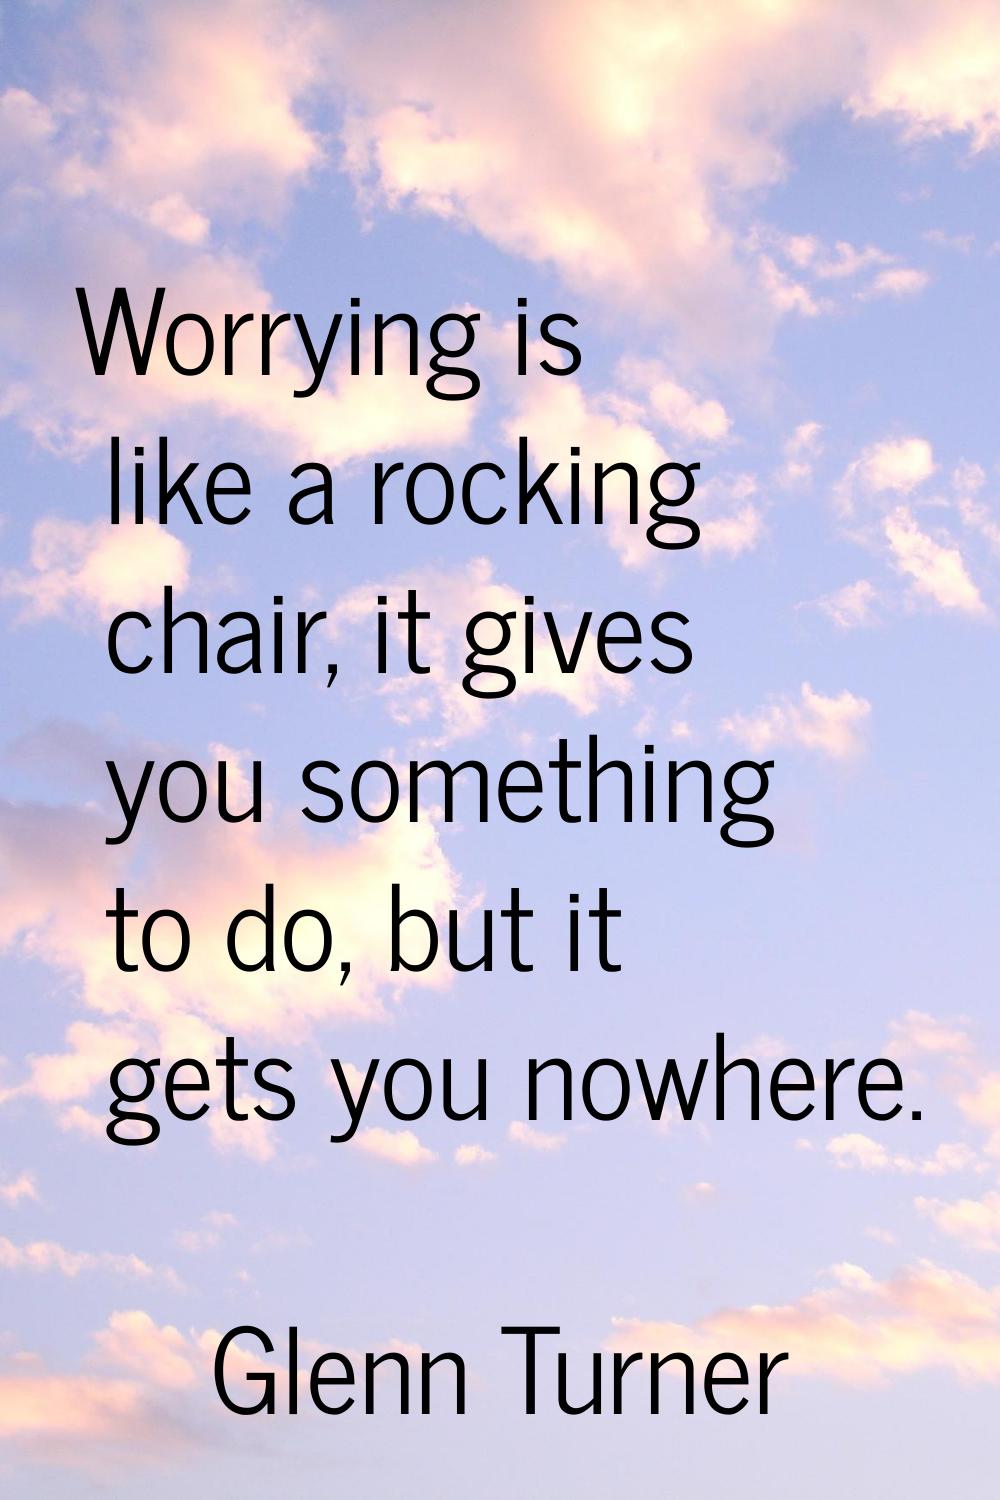 Worrying is like a rocking chair, it gives you something to do, but it gets you nowhere.